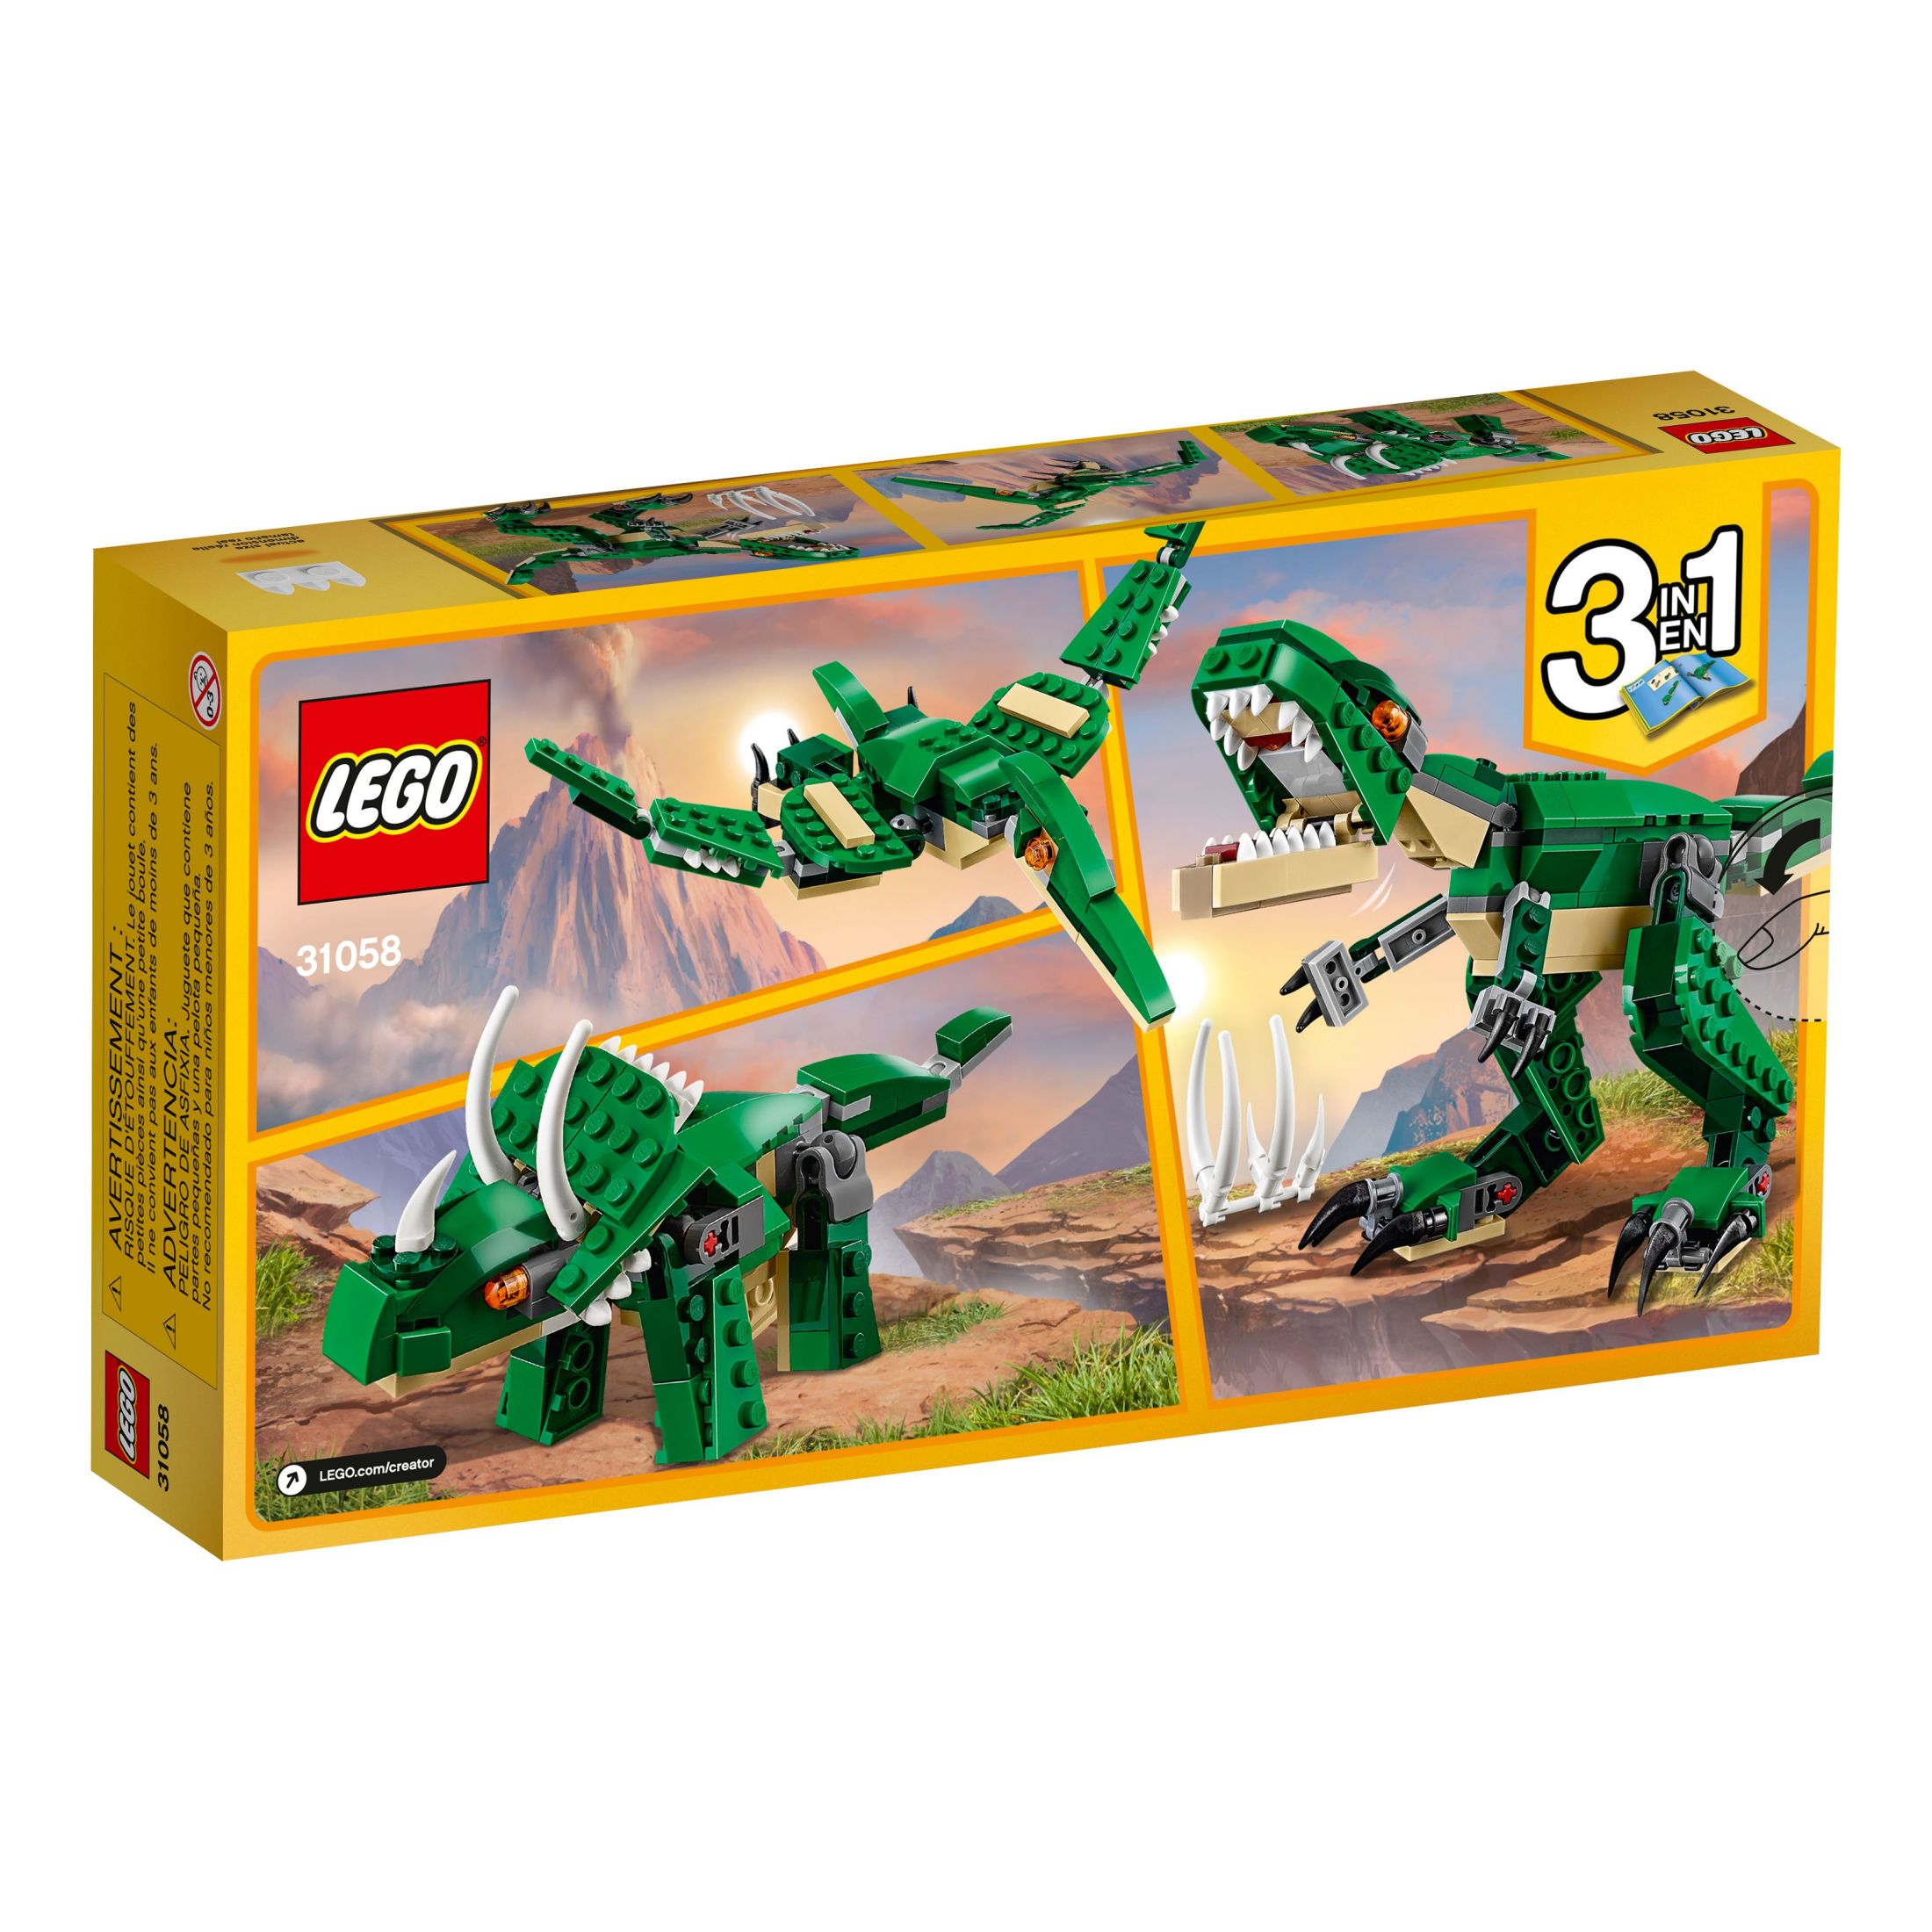 LEGO Creator 3 in 1 Mighty Dinosaur Toy, Transforms from T. rex to Triceratops to Pterodactyl Dinosaur Figures, Great Gift for 7 - 12 Year Old Boys & Girls, 31058 - image 4 of 6